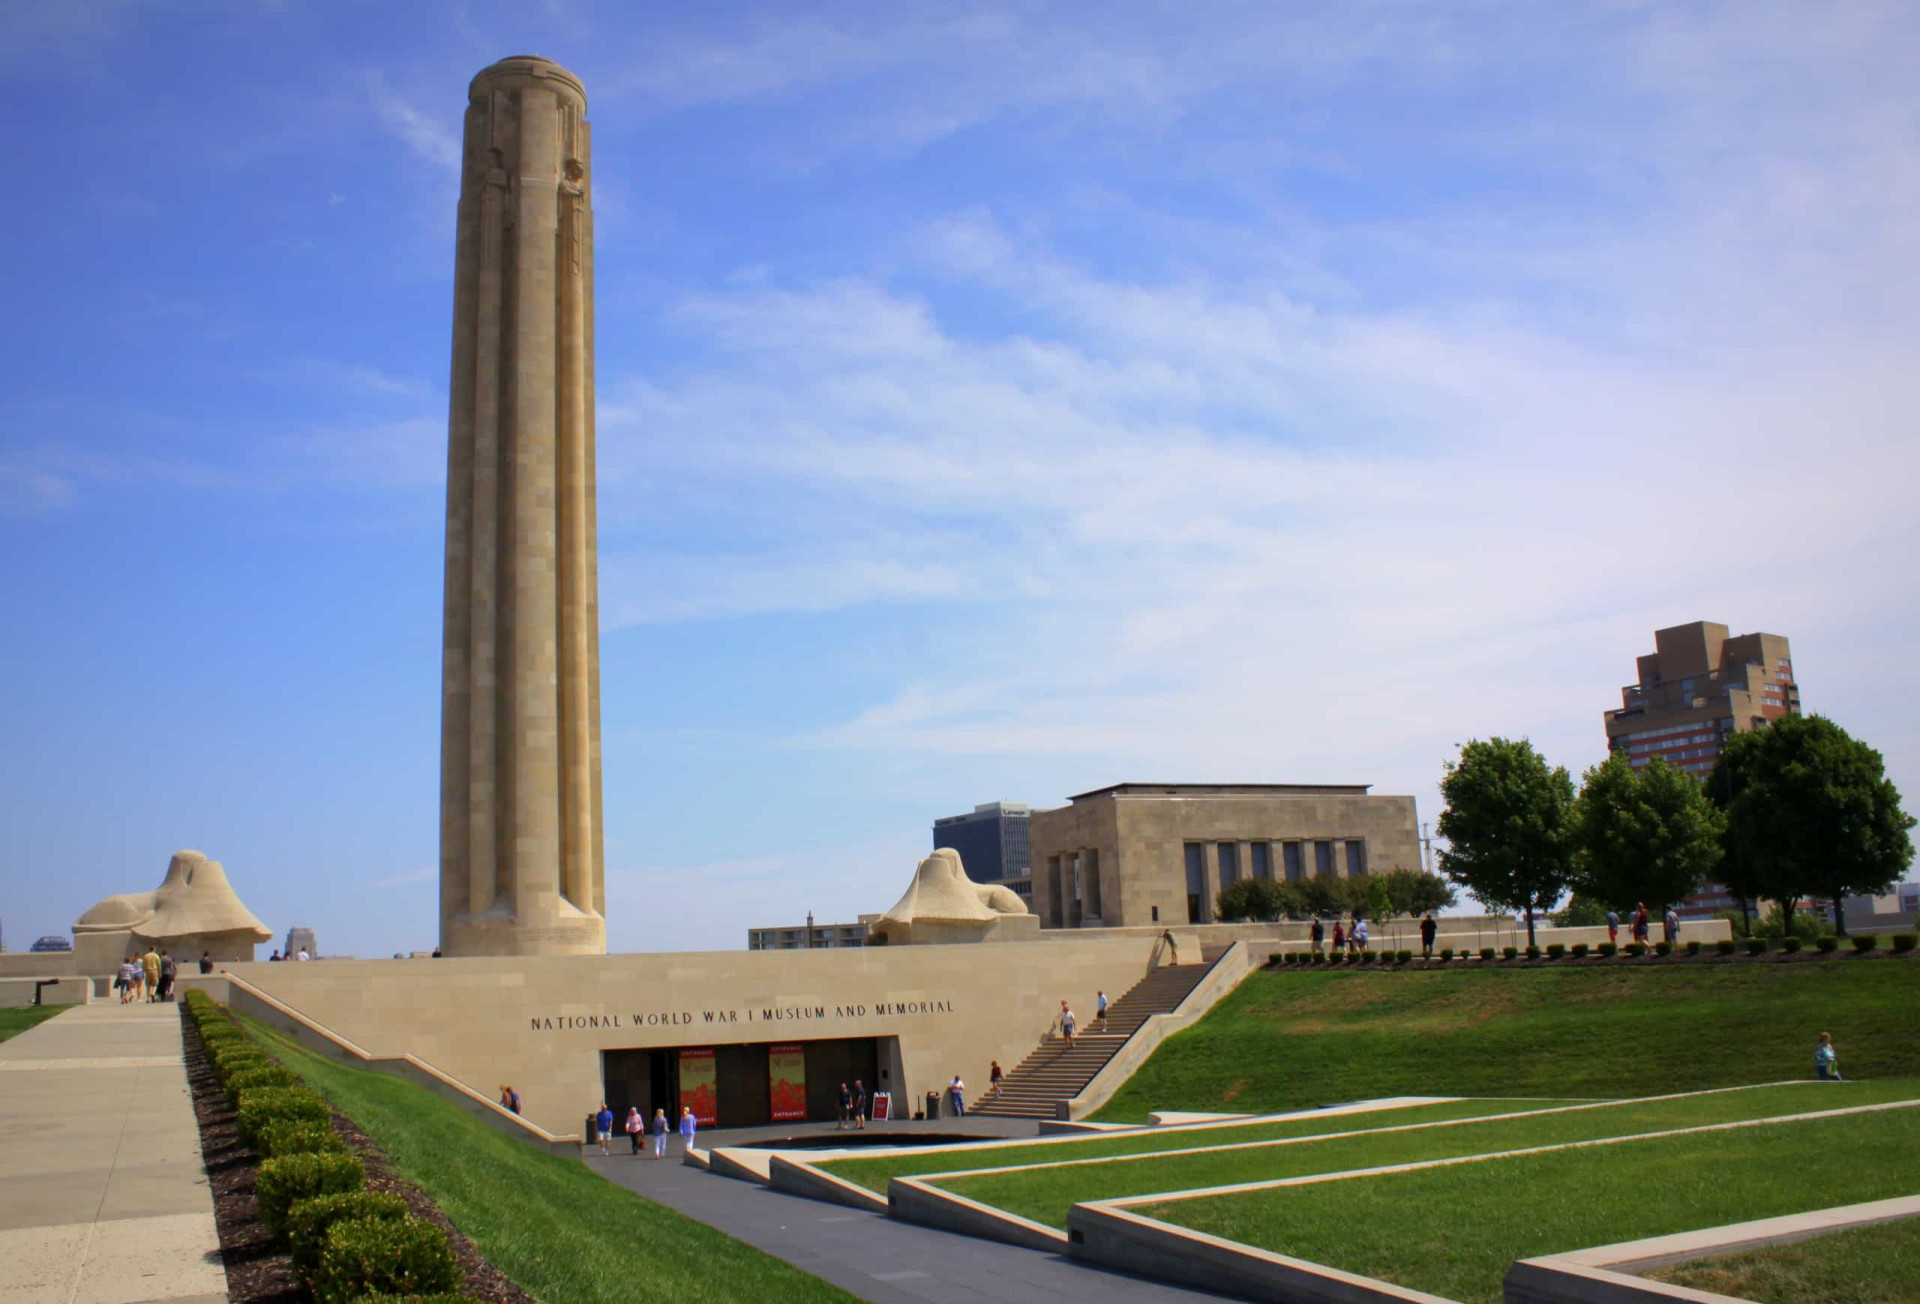 <p>Located in downtown Kansas City, the National WWI War Museum is America's official World War I museum. The Liberty Memorial was built in 1926 as a lasting tribute to those who lost their lives in the war, and the museum's thought-provoking exhibits highlight the causes and impact of the war.</p><p>You may also like:<a href="https://www.starsinsider.com/n/406311?utm_source=msn.com&utm_medium=display&utm_campaign=referral_description&utm_content=486112v1en-us"> Stellar spectacular: NASA photos that will make you feel small</a></p>